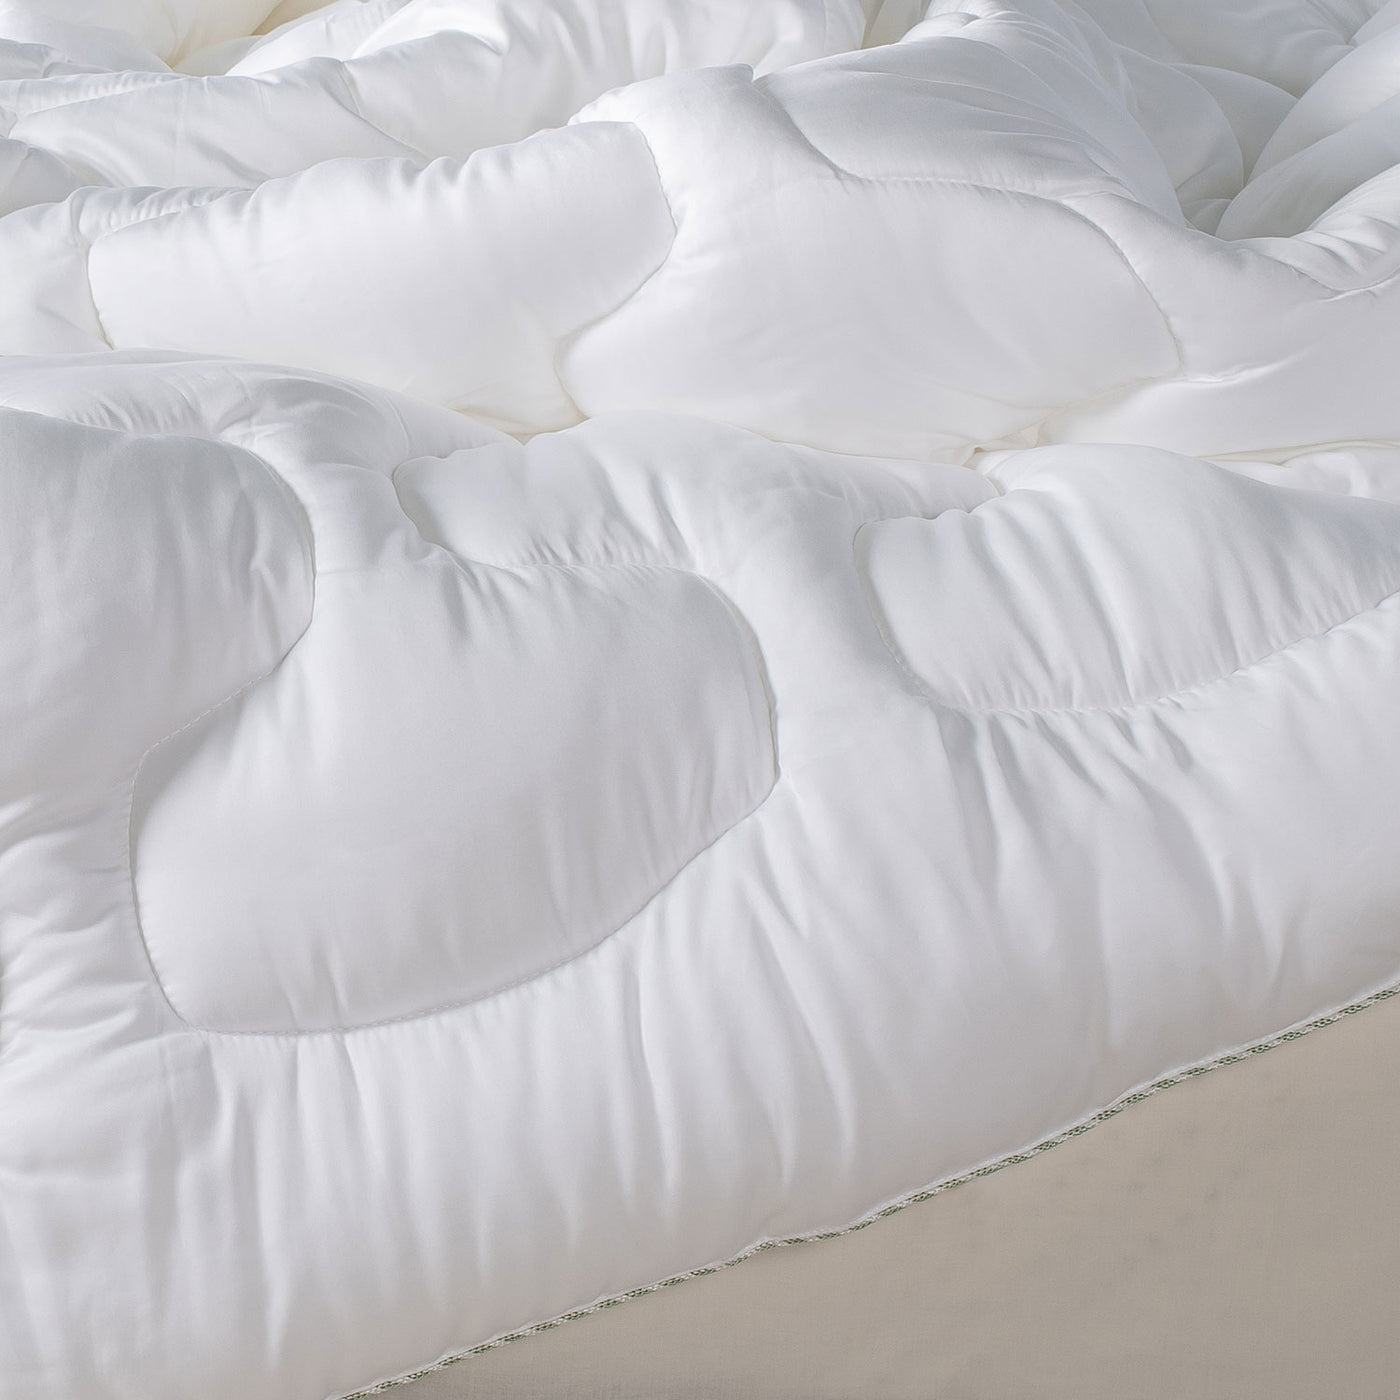 Lightweight Summer Quilt with Natural wood pulp TENCEL™ ( Certified by a Swiss laboratory)